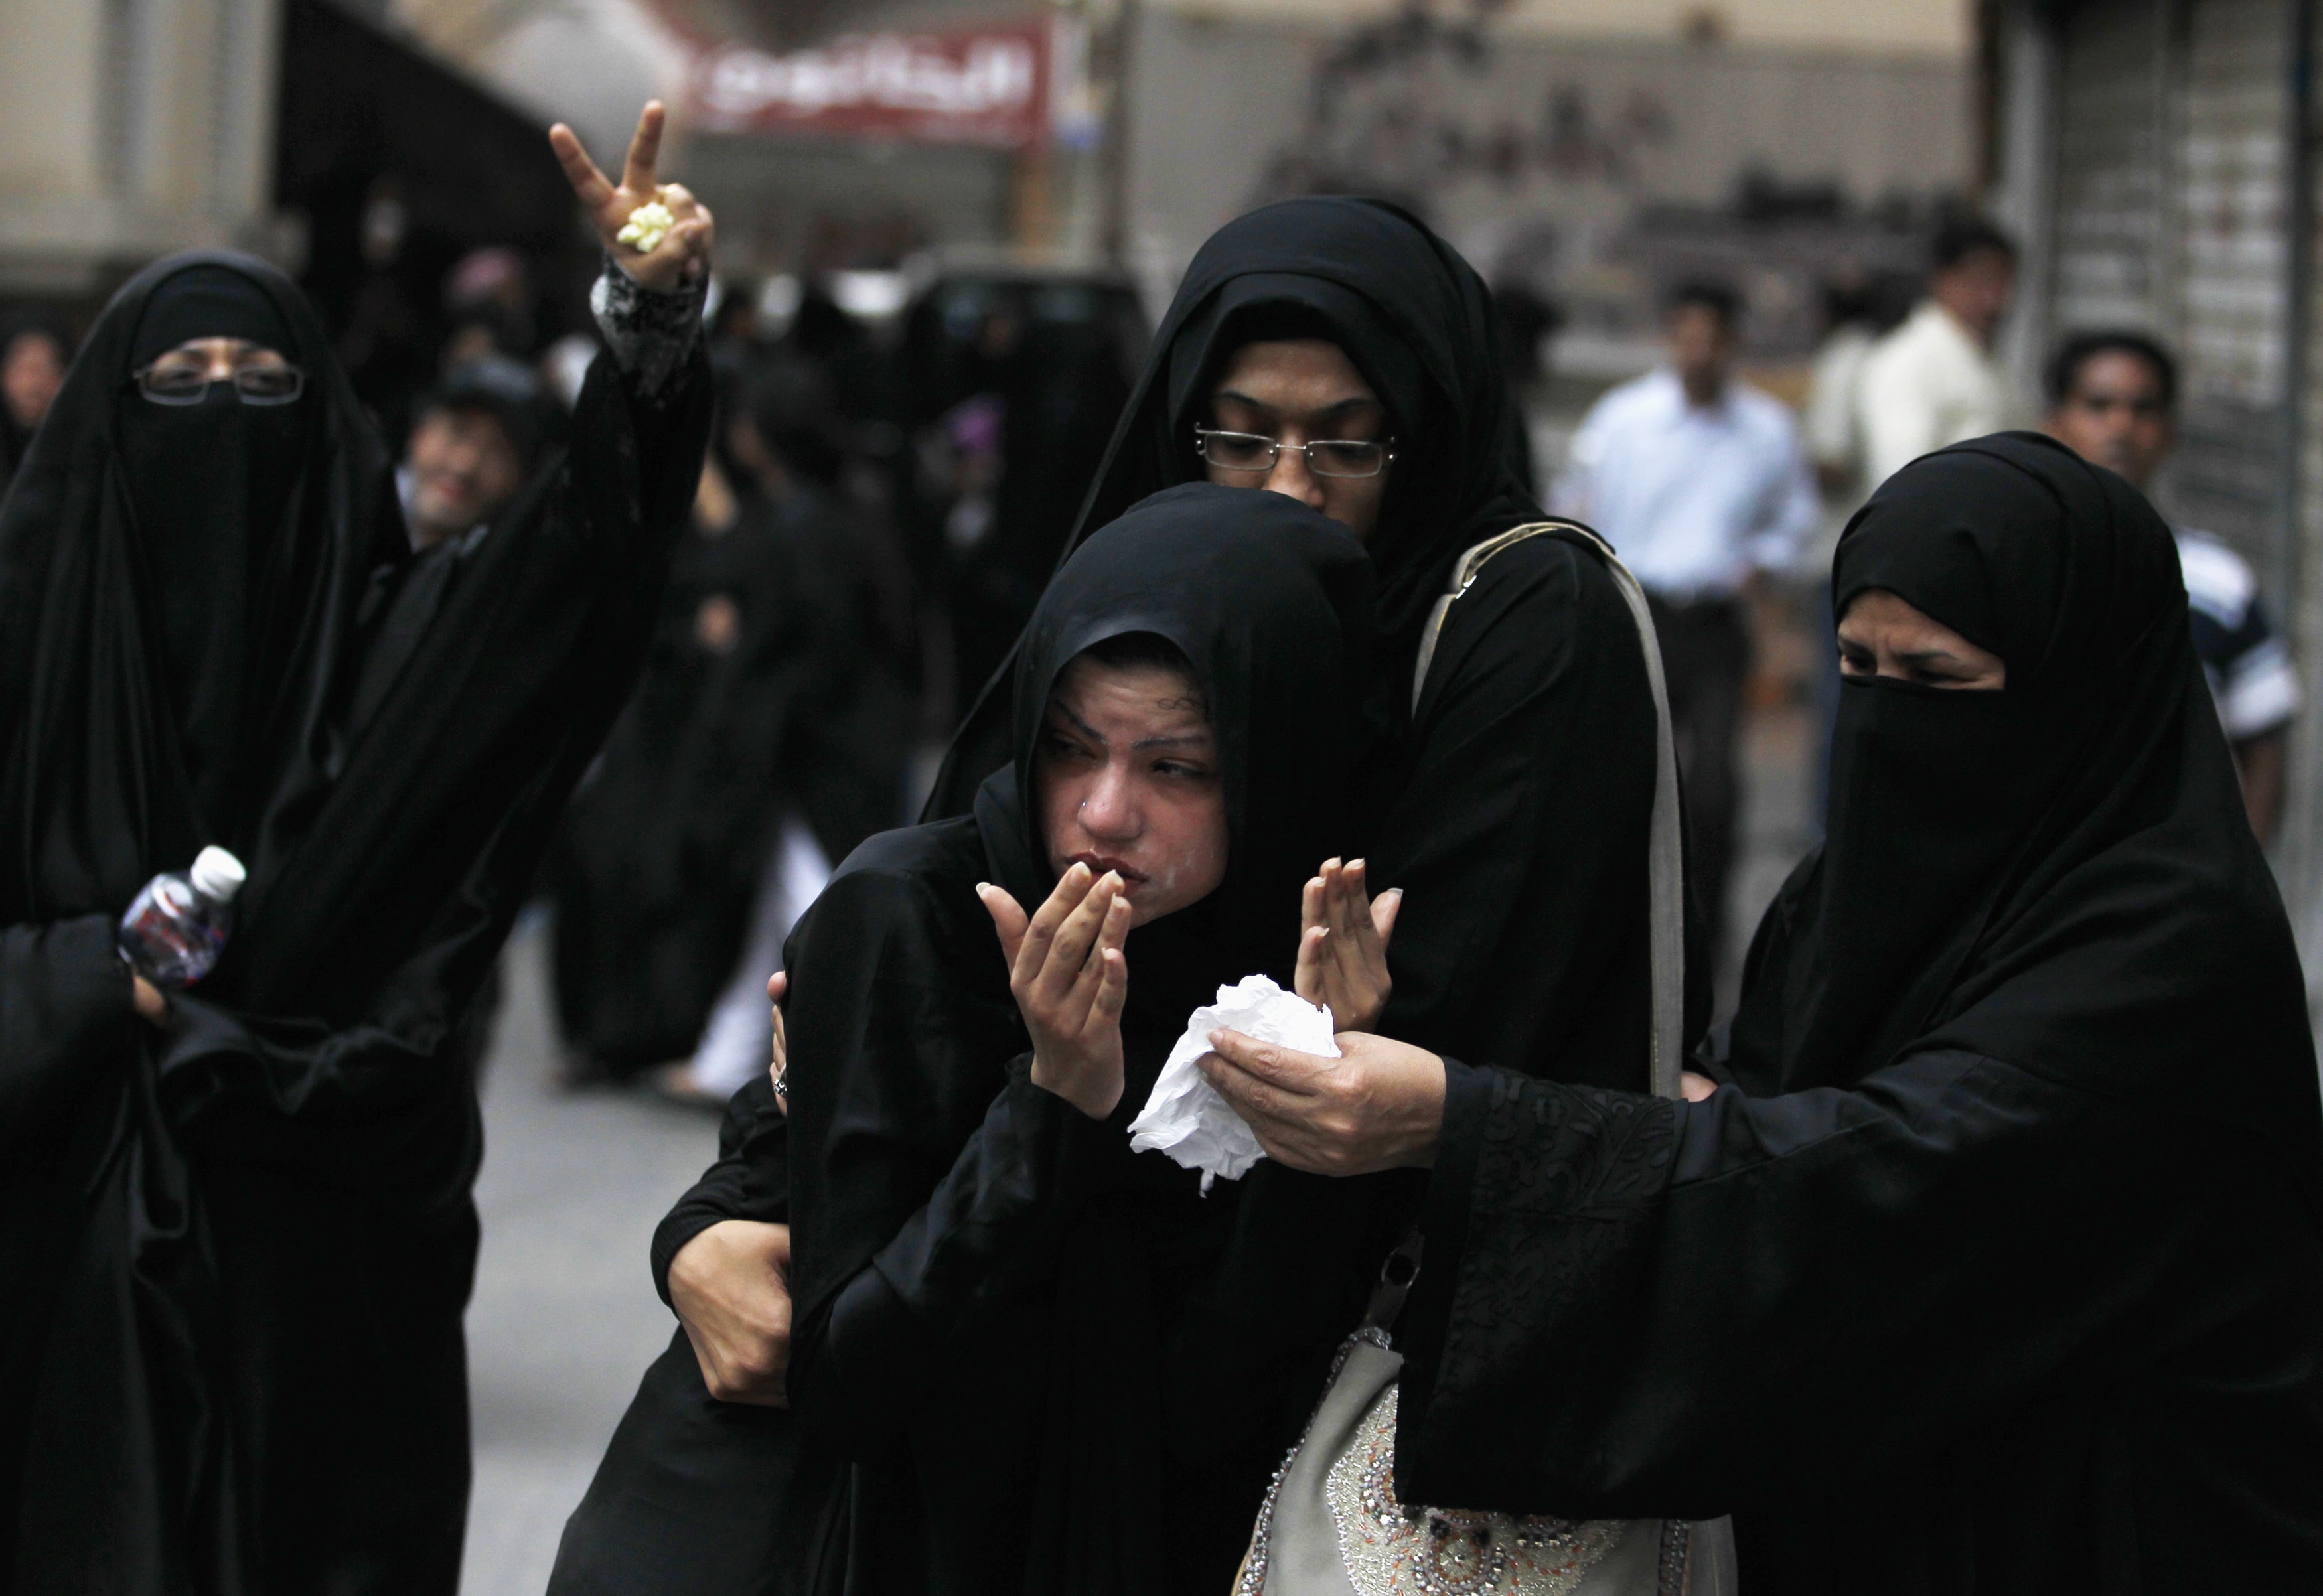 An anti-government protester (C) is carried by her fellow protesters after she was pepper-sprayed by riot police during a rally in Manama on 7 April 2012, REUTERS/Hamad I Mohammed